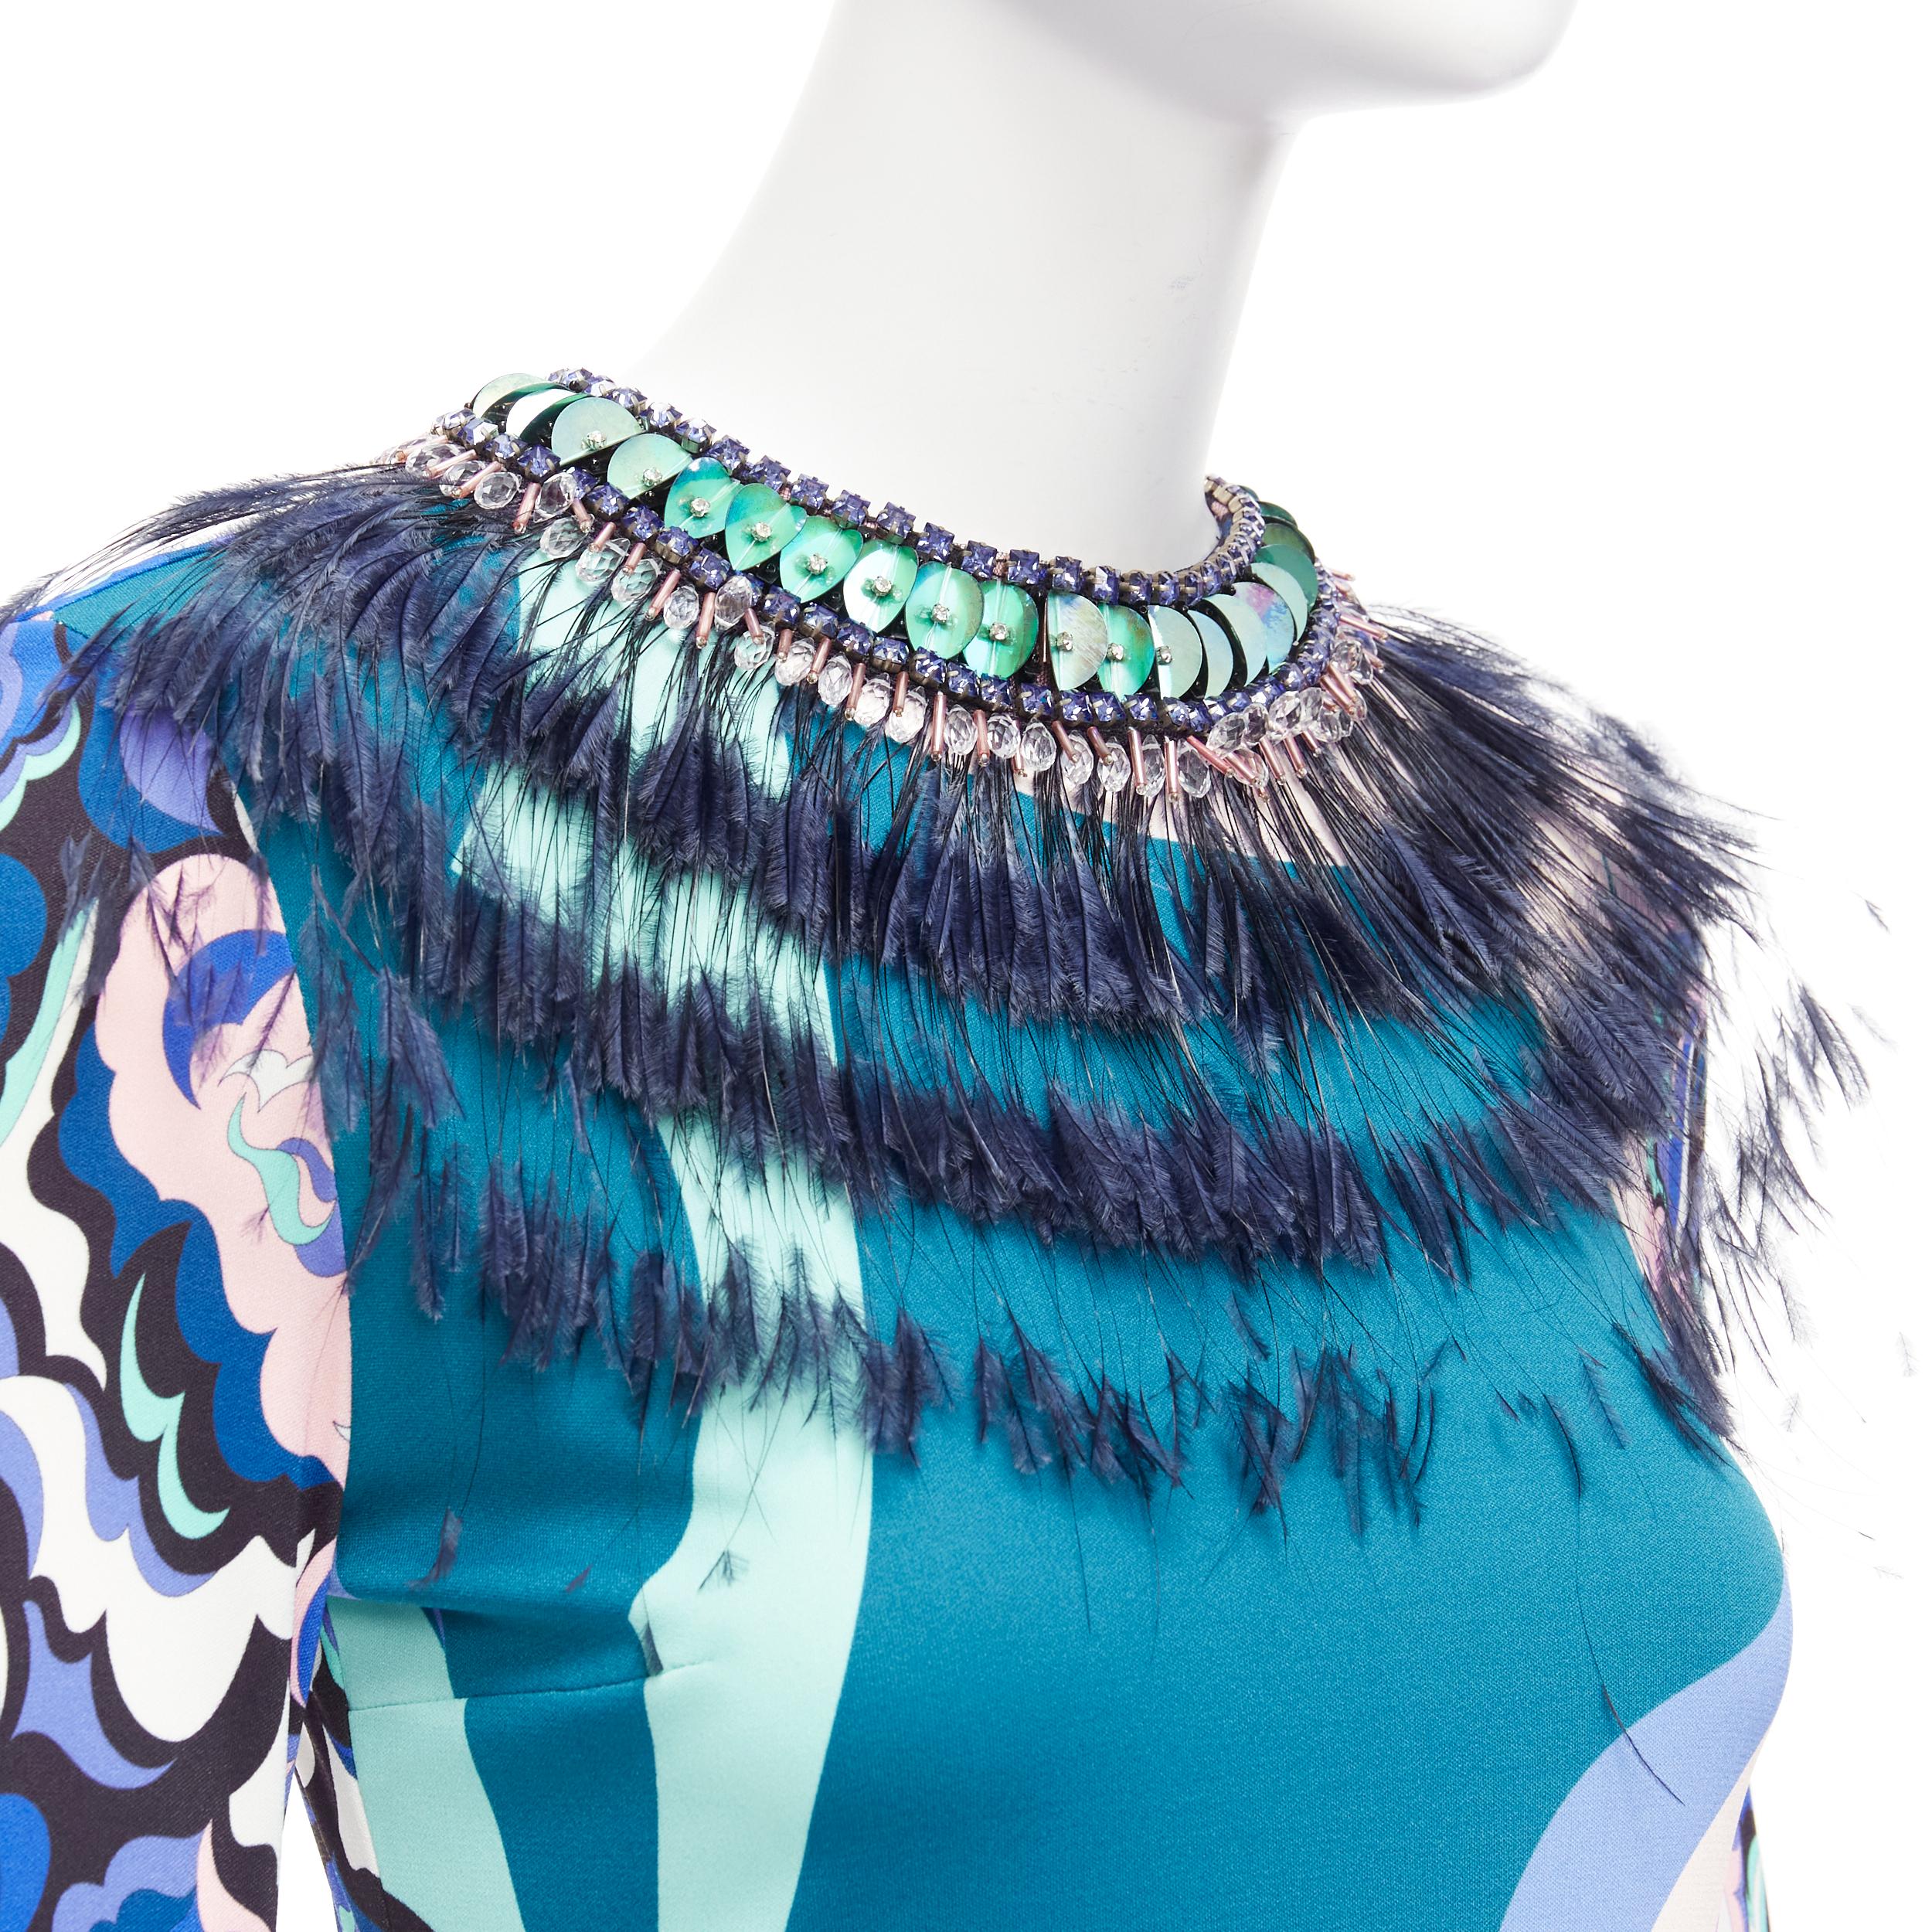 EMILIO PUCCI pink blue ostrich feather collar crystal embellished dress
Reference: CC/A00402
Brand: Emilio Pucci
Material: Fabric, Feather
Color: Multicolour
Pattern: Abstract
Closure: Zip
Extra Details: Back zip. Embellishments at collar and